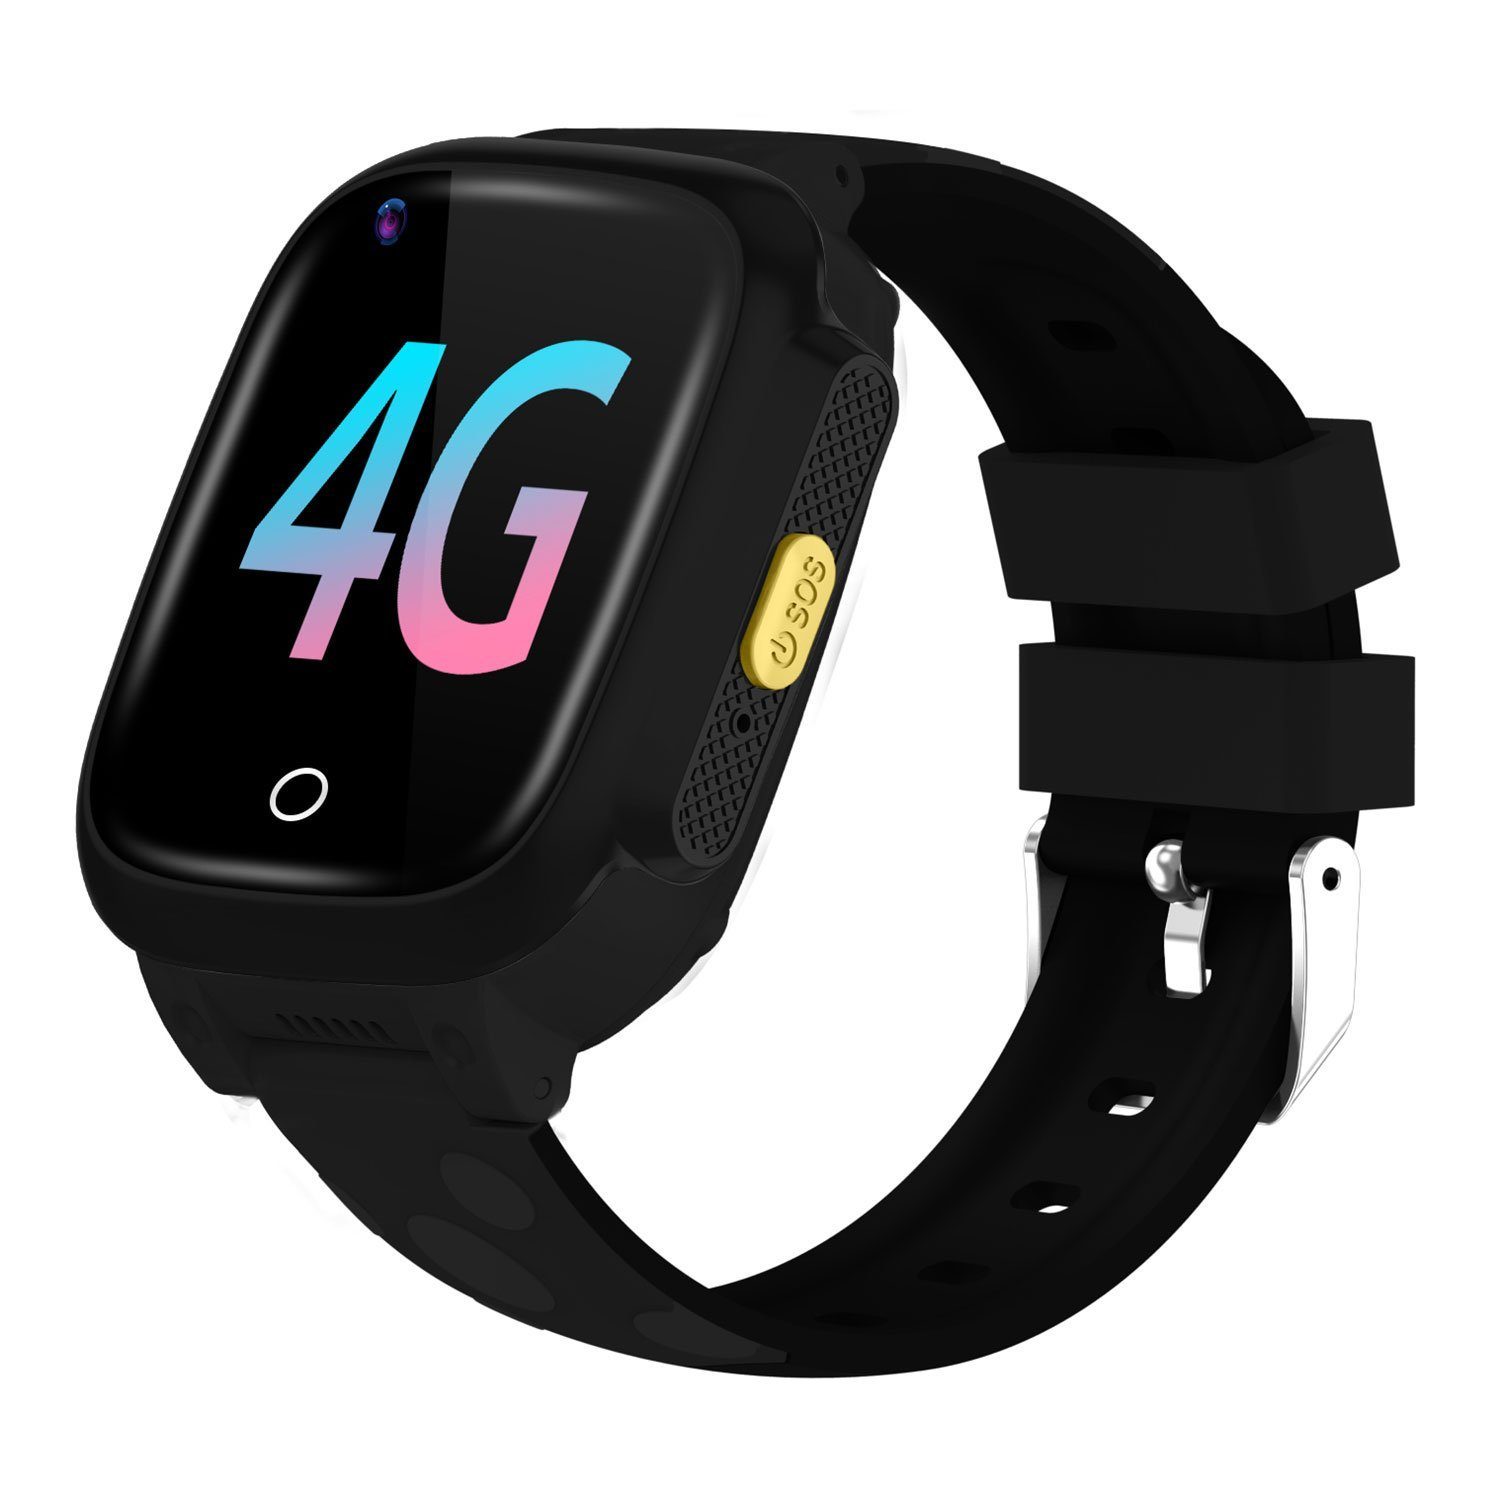 Kidocall - 4G Smartwatch, Phone & GPS tracking for Kids Black